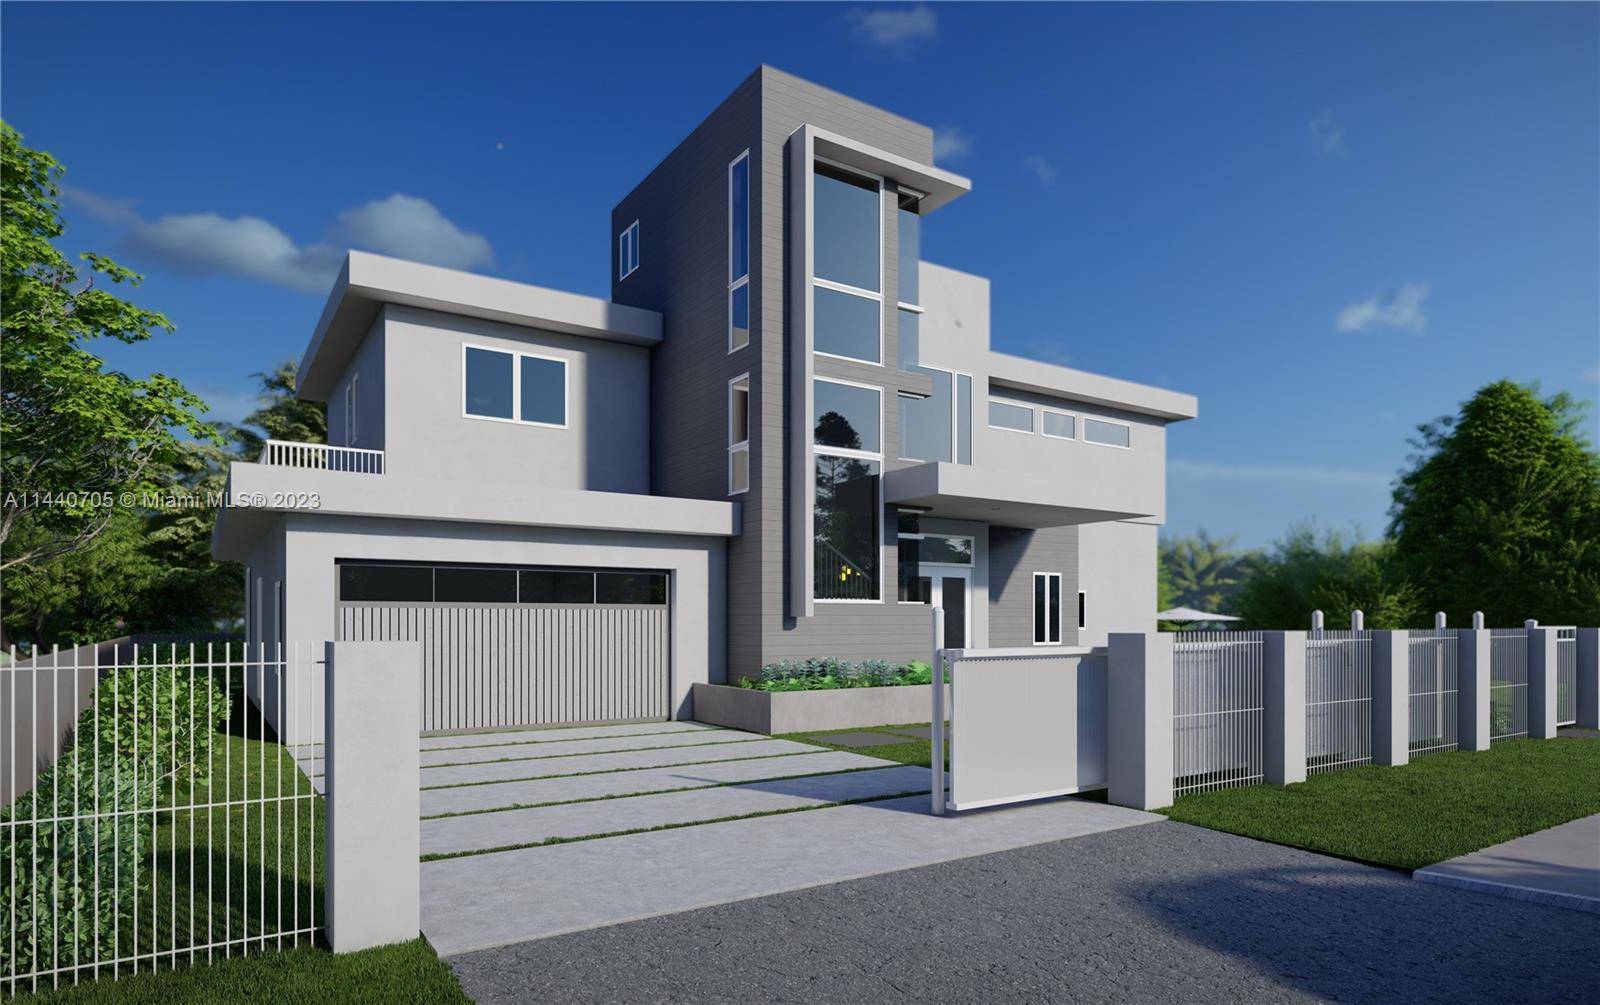 Magnificent pre construction home to be built by seller on a waterfront vacant lot 8, 750 sqft with 63 ft of waterfront on an ocean access, deep water canal with ...